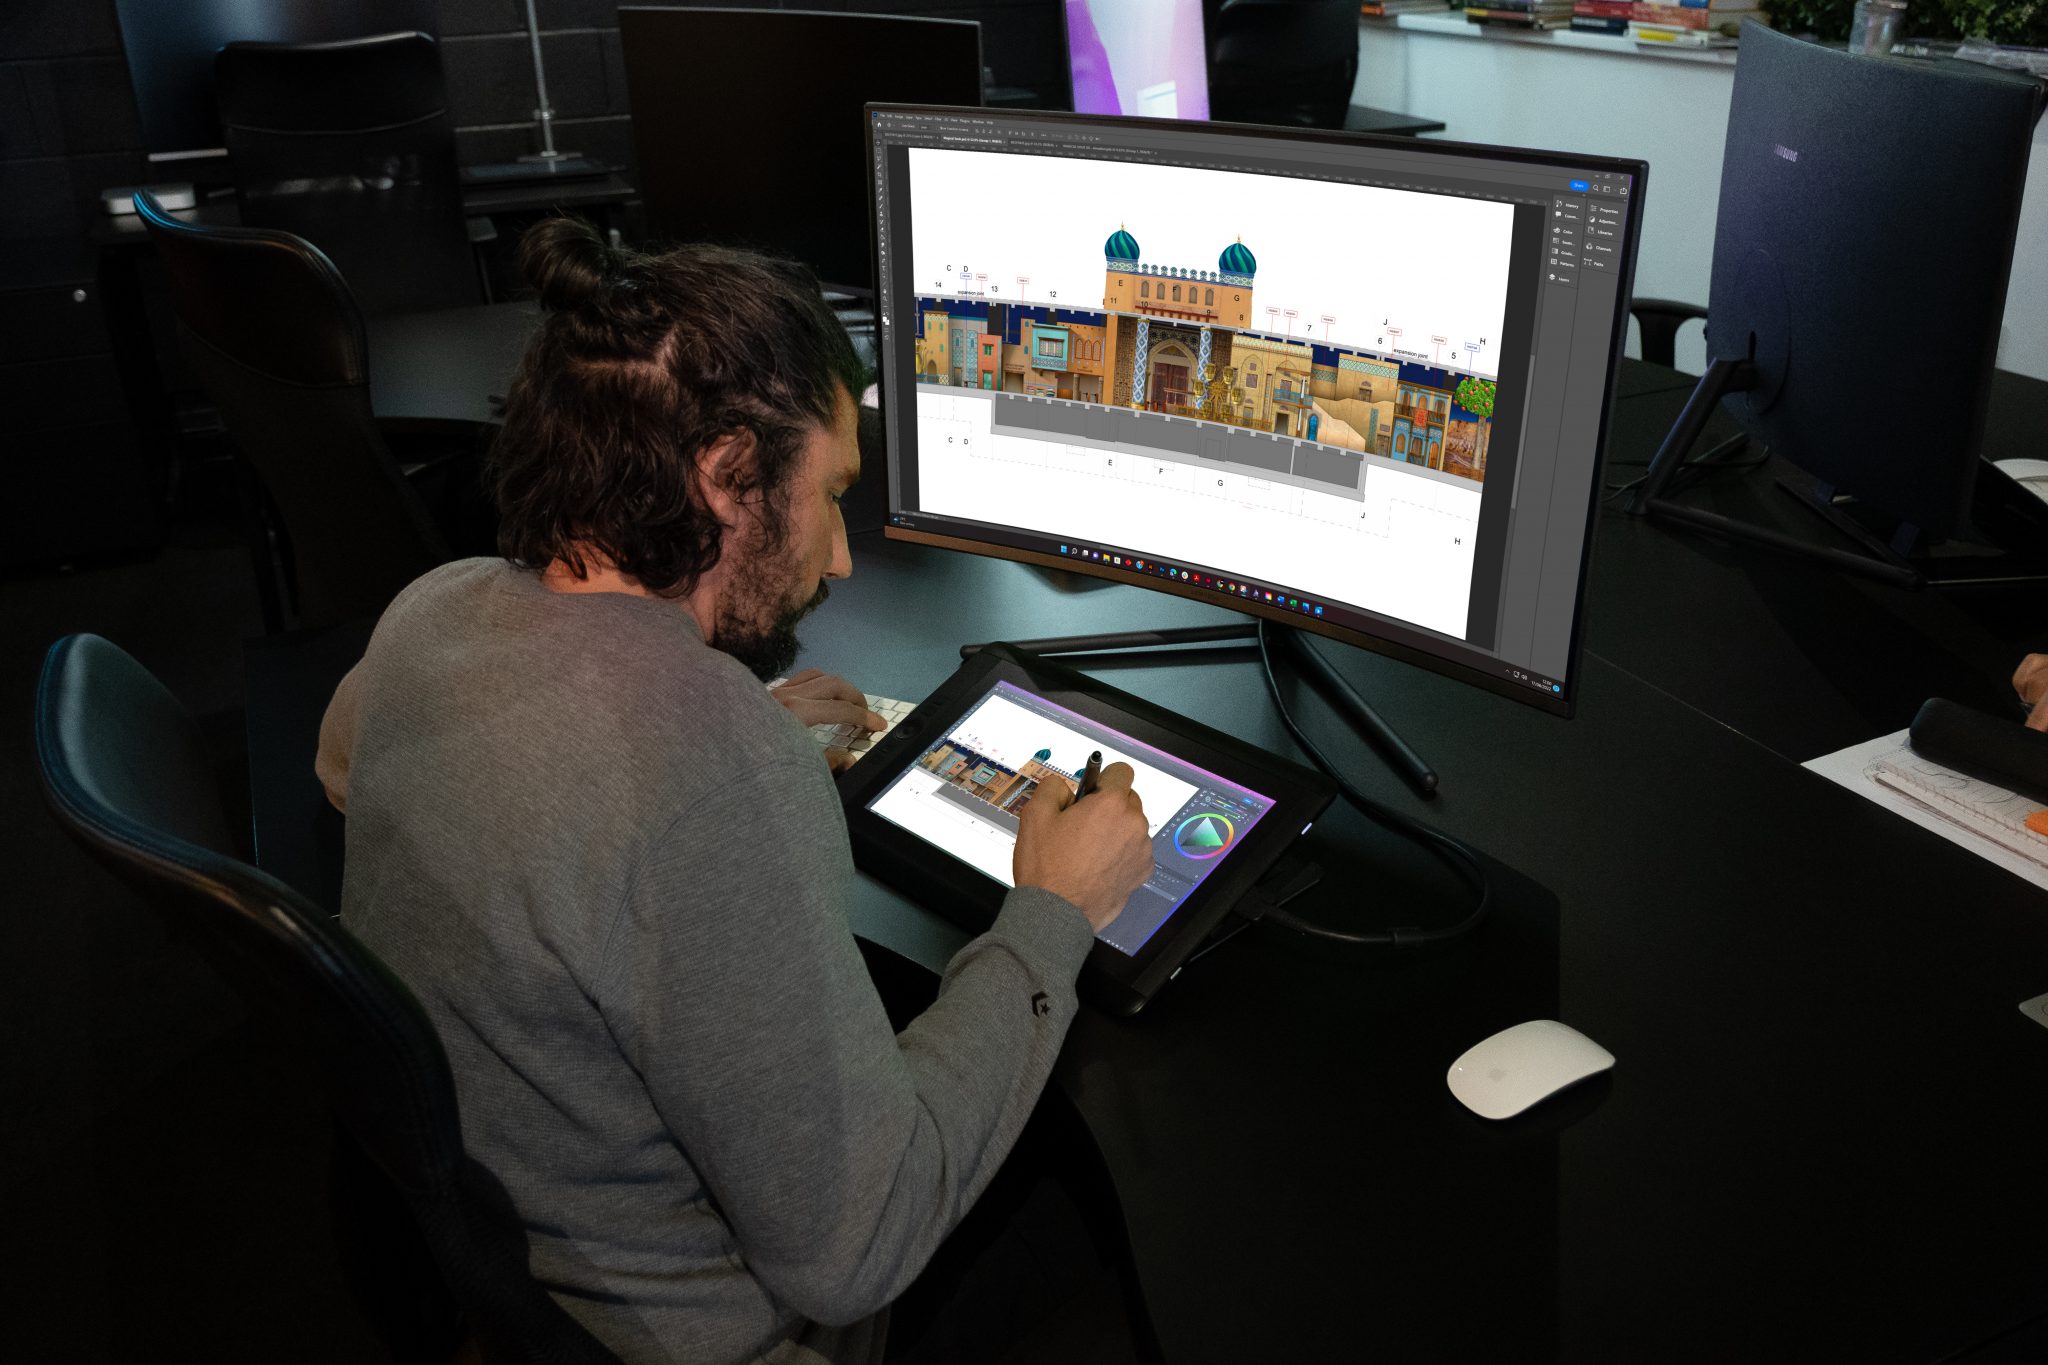 A person drawing a concept image on a tablet of a large building while it's being projected onto a computer screen